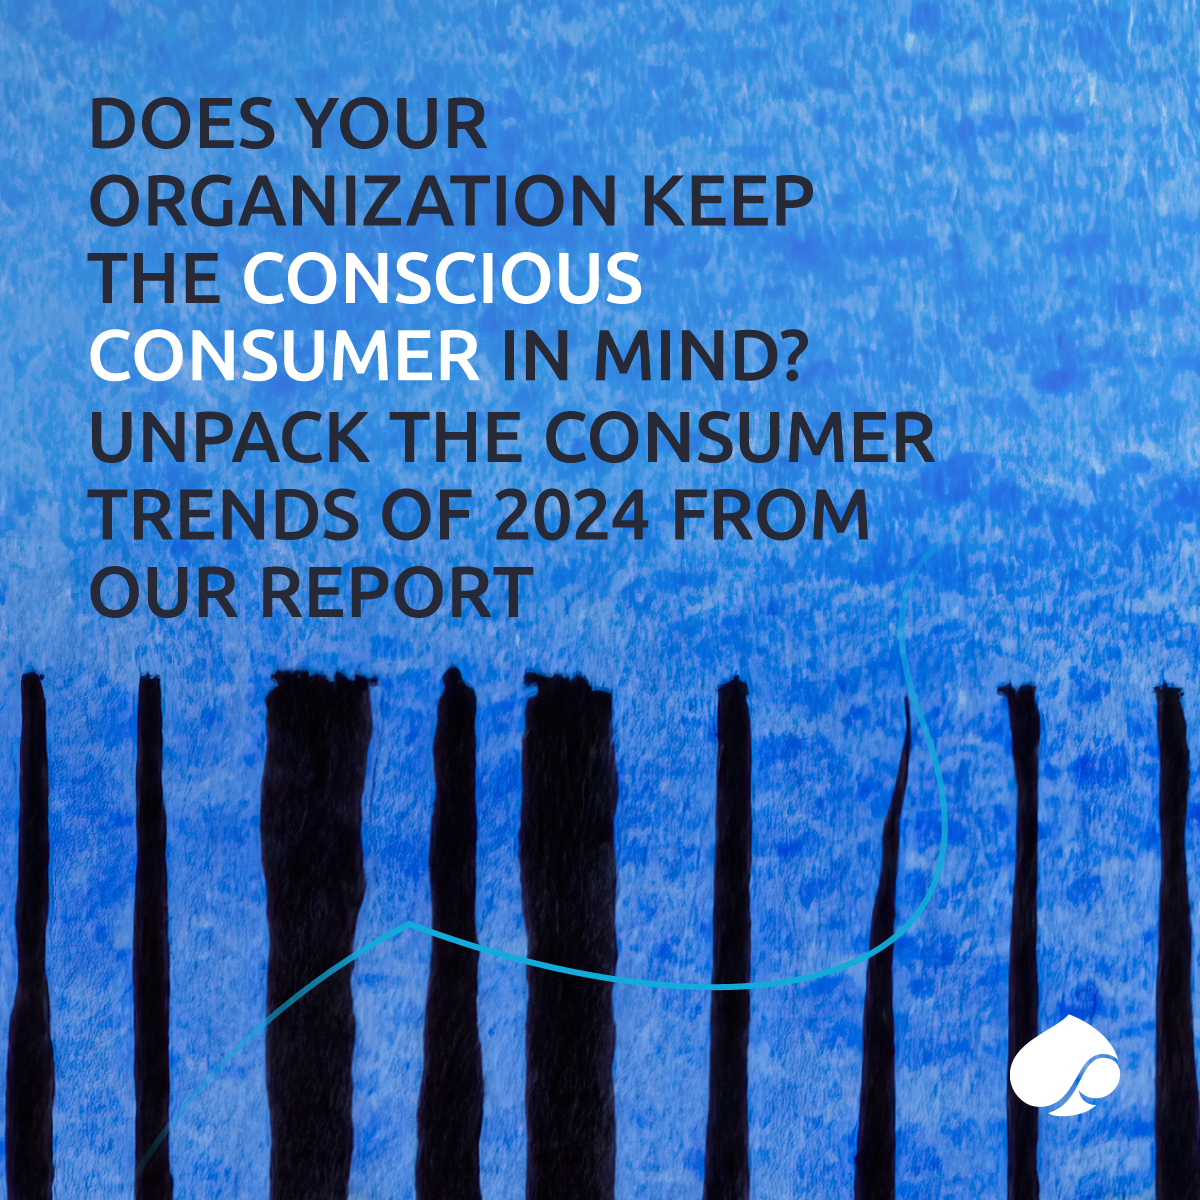 Our research reveals that consumers are buying from companies they consider sustainable. To be precise:
🌍 60% of consumers globally
💁 71% of Gen Z consumers

Explore how #retailers can adapt to shifts in #ConsumerBehavior 👉 bit.ly/3twXxVL

#ConsumerTrends